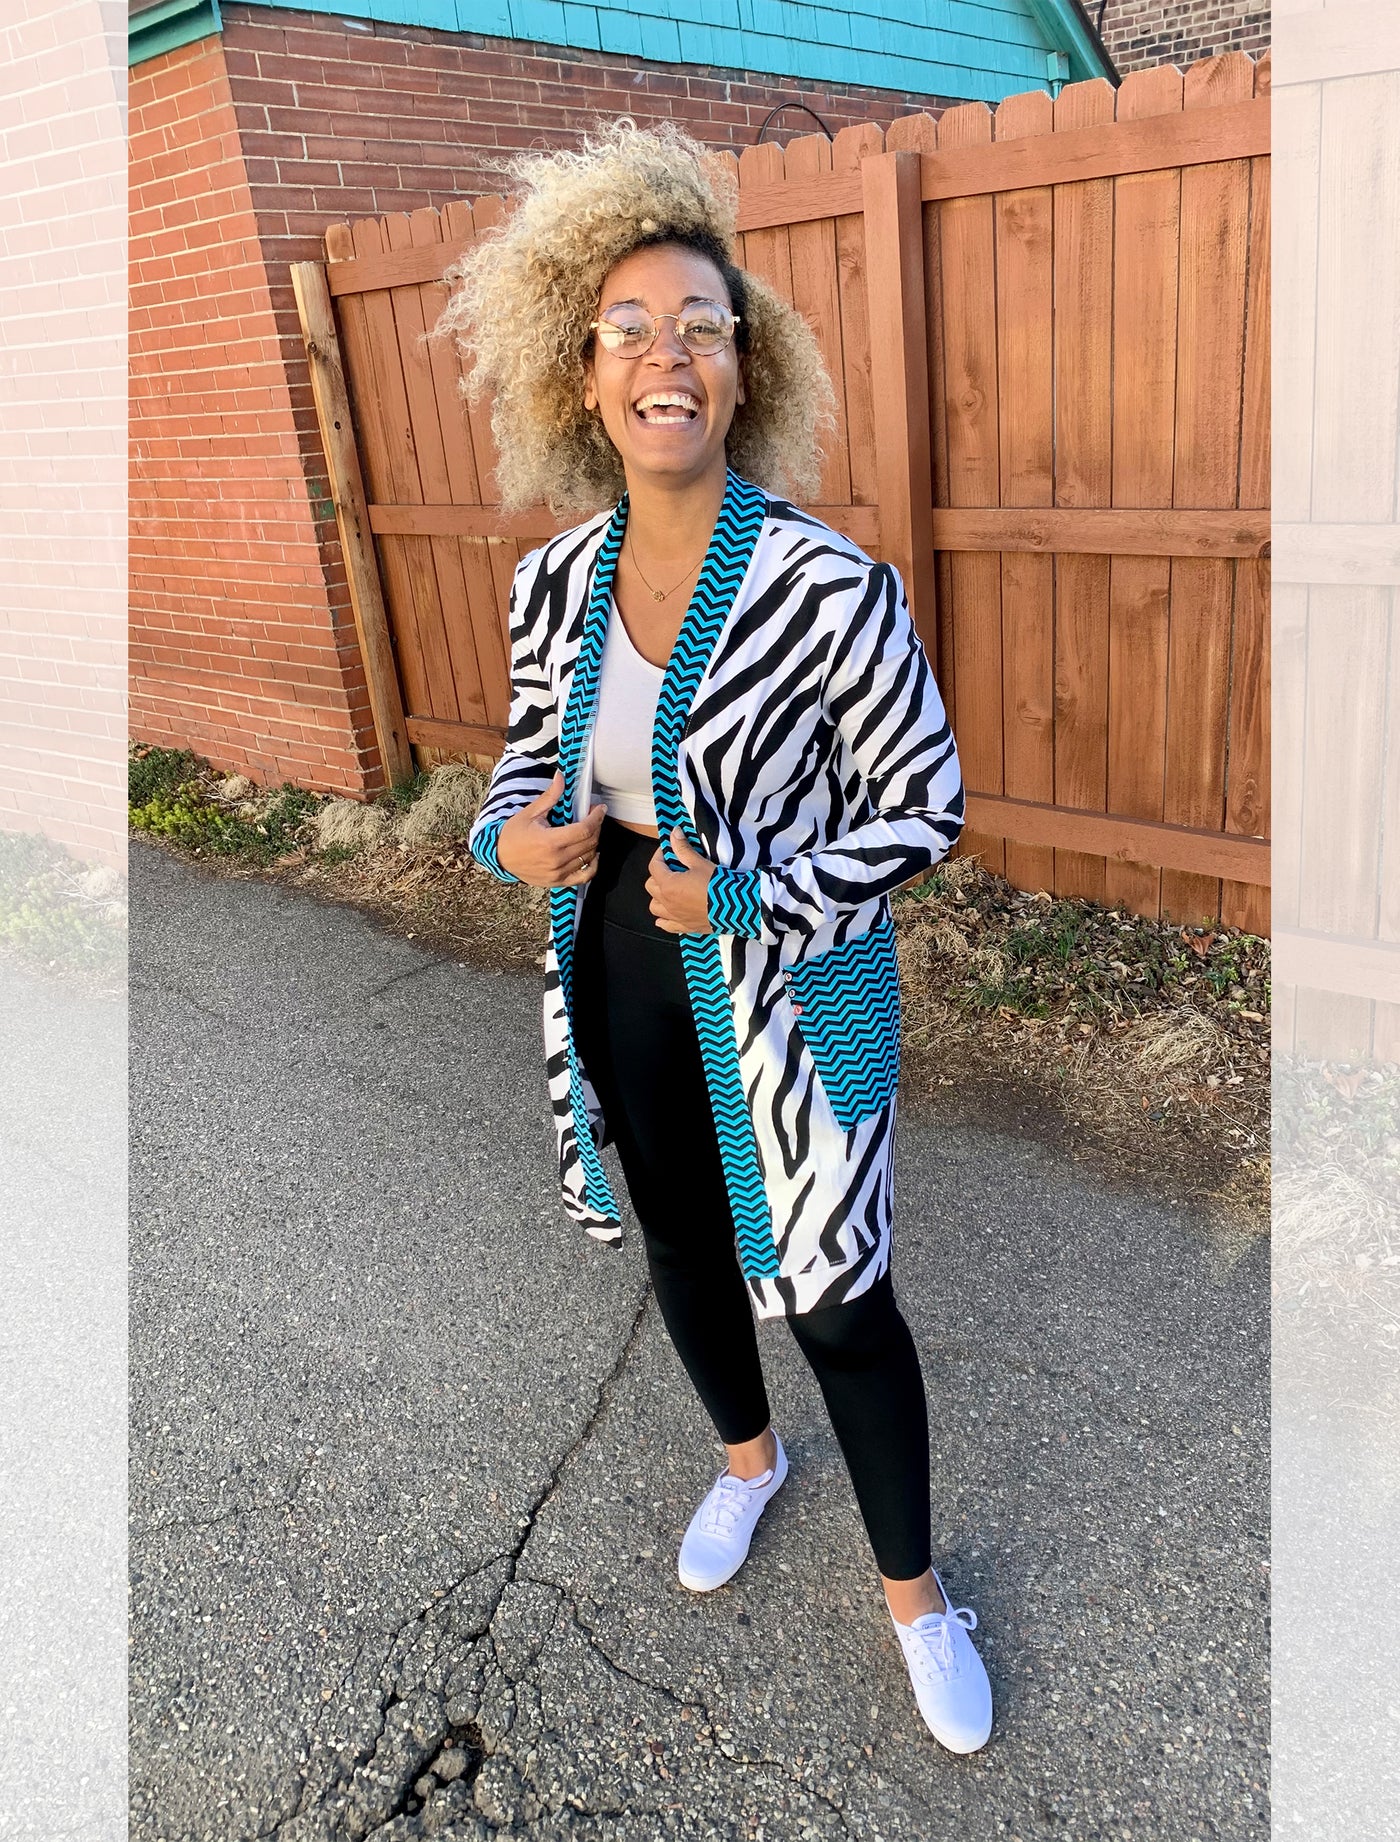 Model stands outside in front of a fence smiling as she wears a knee length cardigan with electric blue and navy chevron edging and large, front pockets. The body of the cardigan is black and white zebra pattern. She has paired it with black leggings, a white crop top and white sneakers.